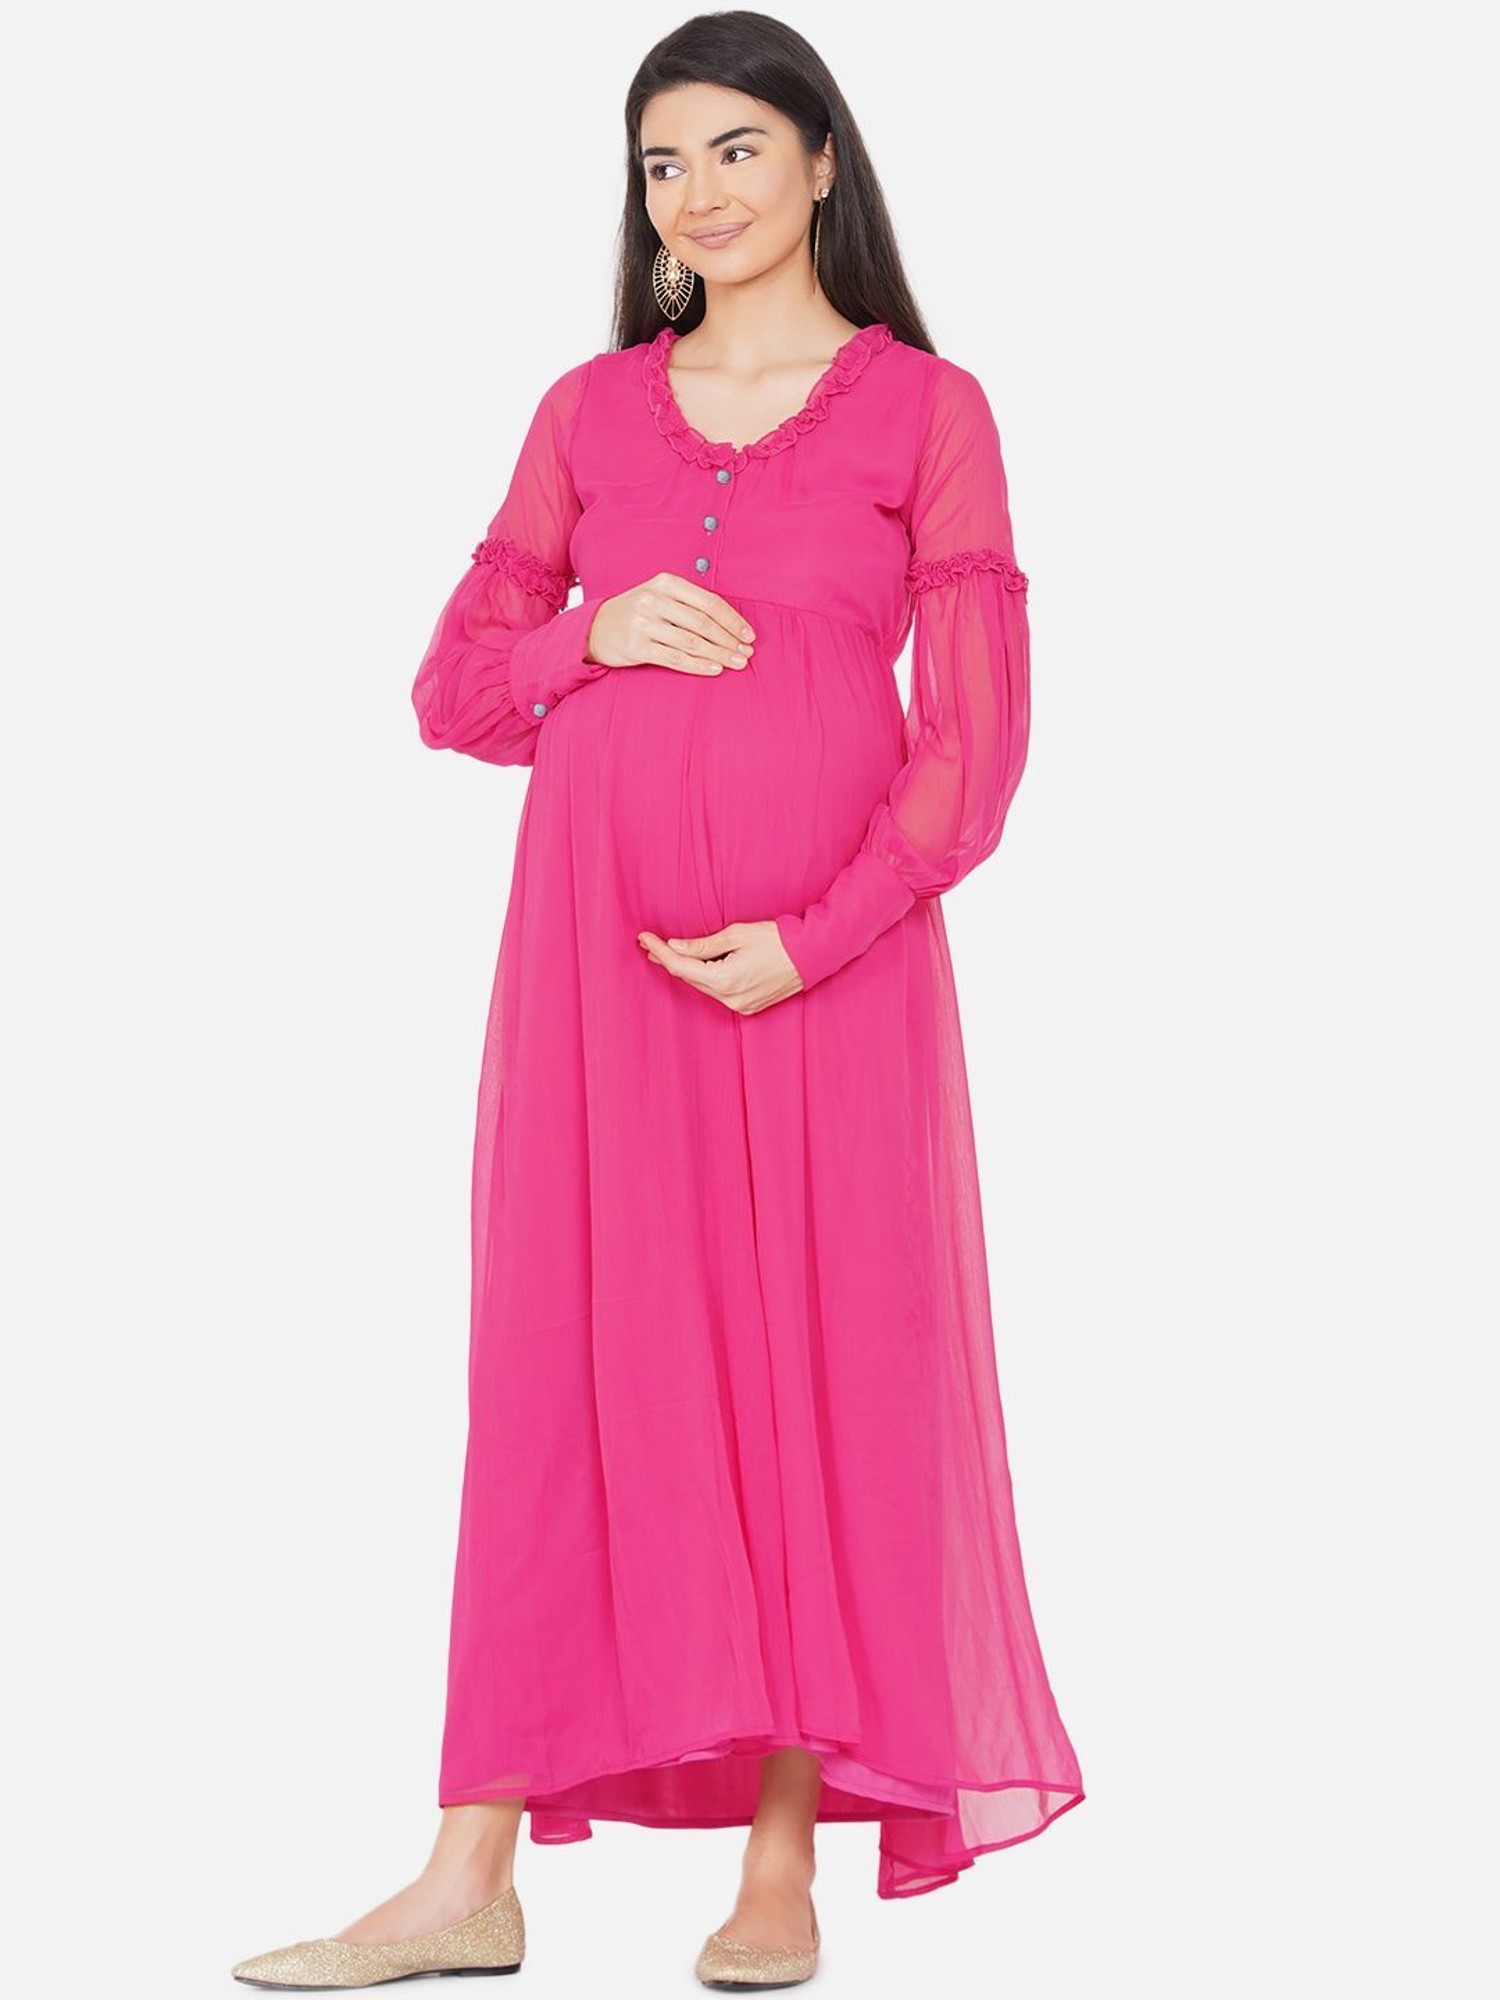 Yellow Chiffon Maternity Gown Size Large Sleeves Full Sleeves